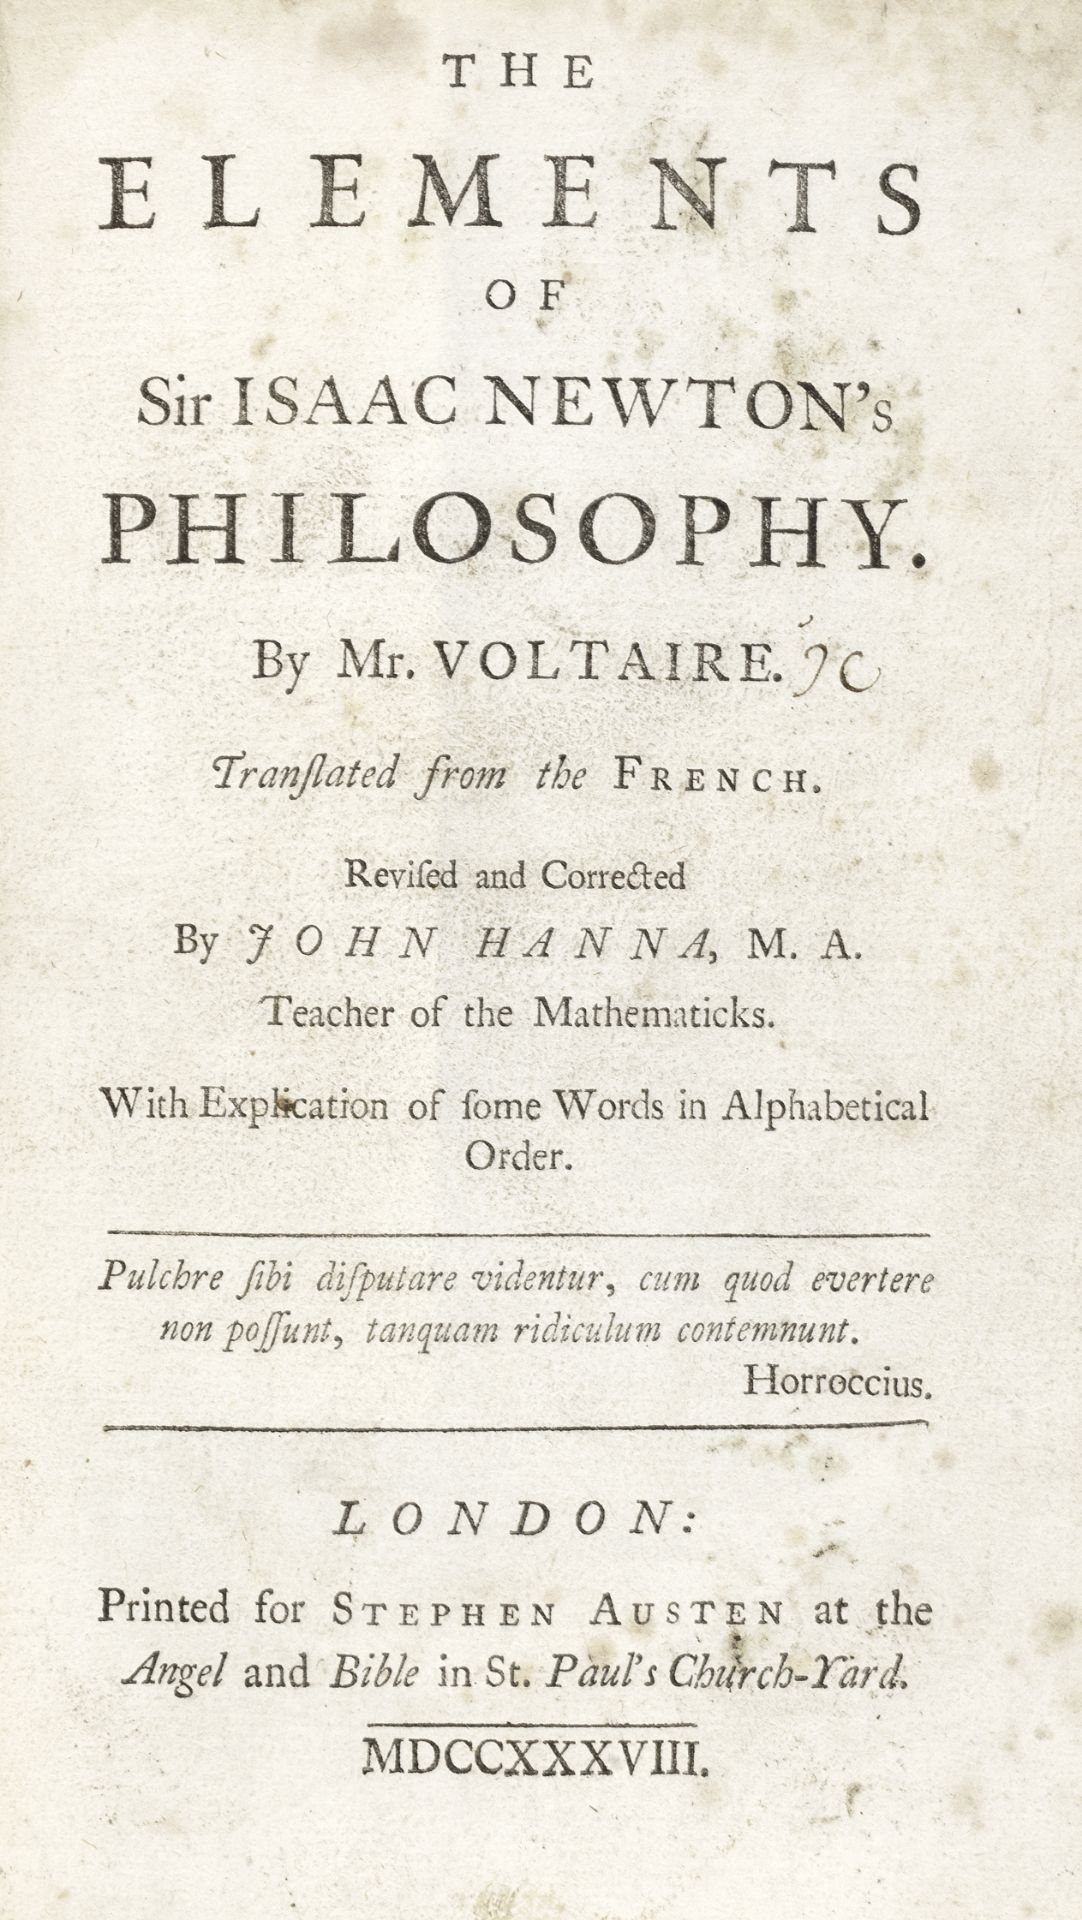 VOLTAIRE (FRANCOIS MARIE AROUET DE) The Elements of Sir Isaac Newton's Philosophy, translated fro...